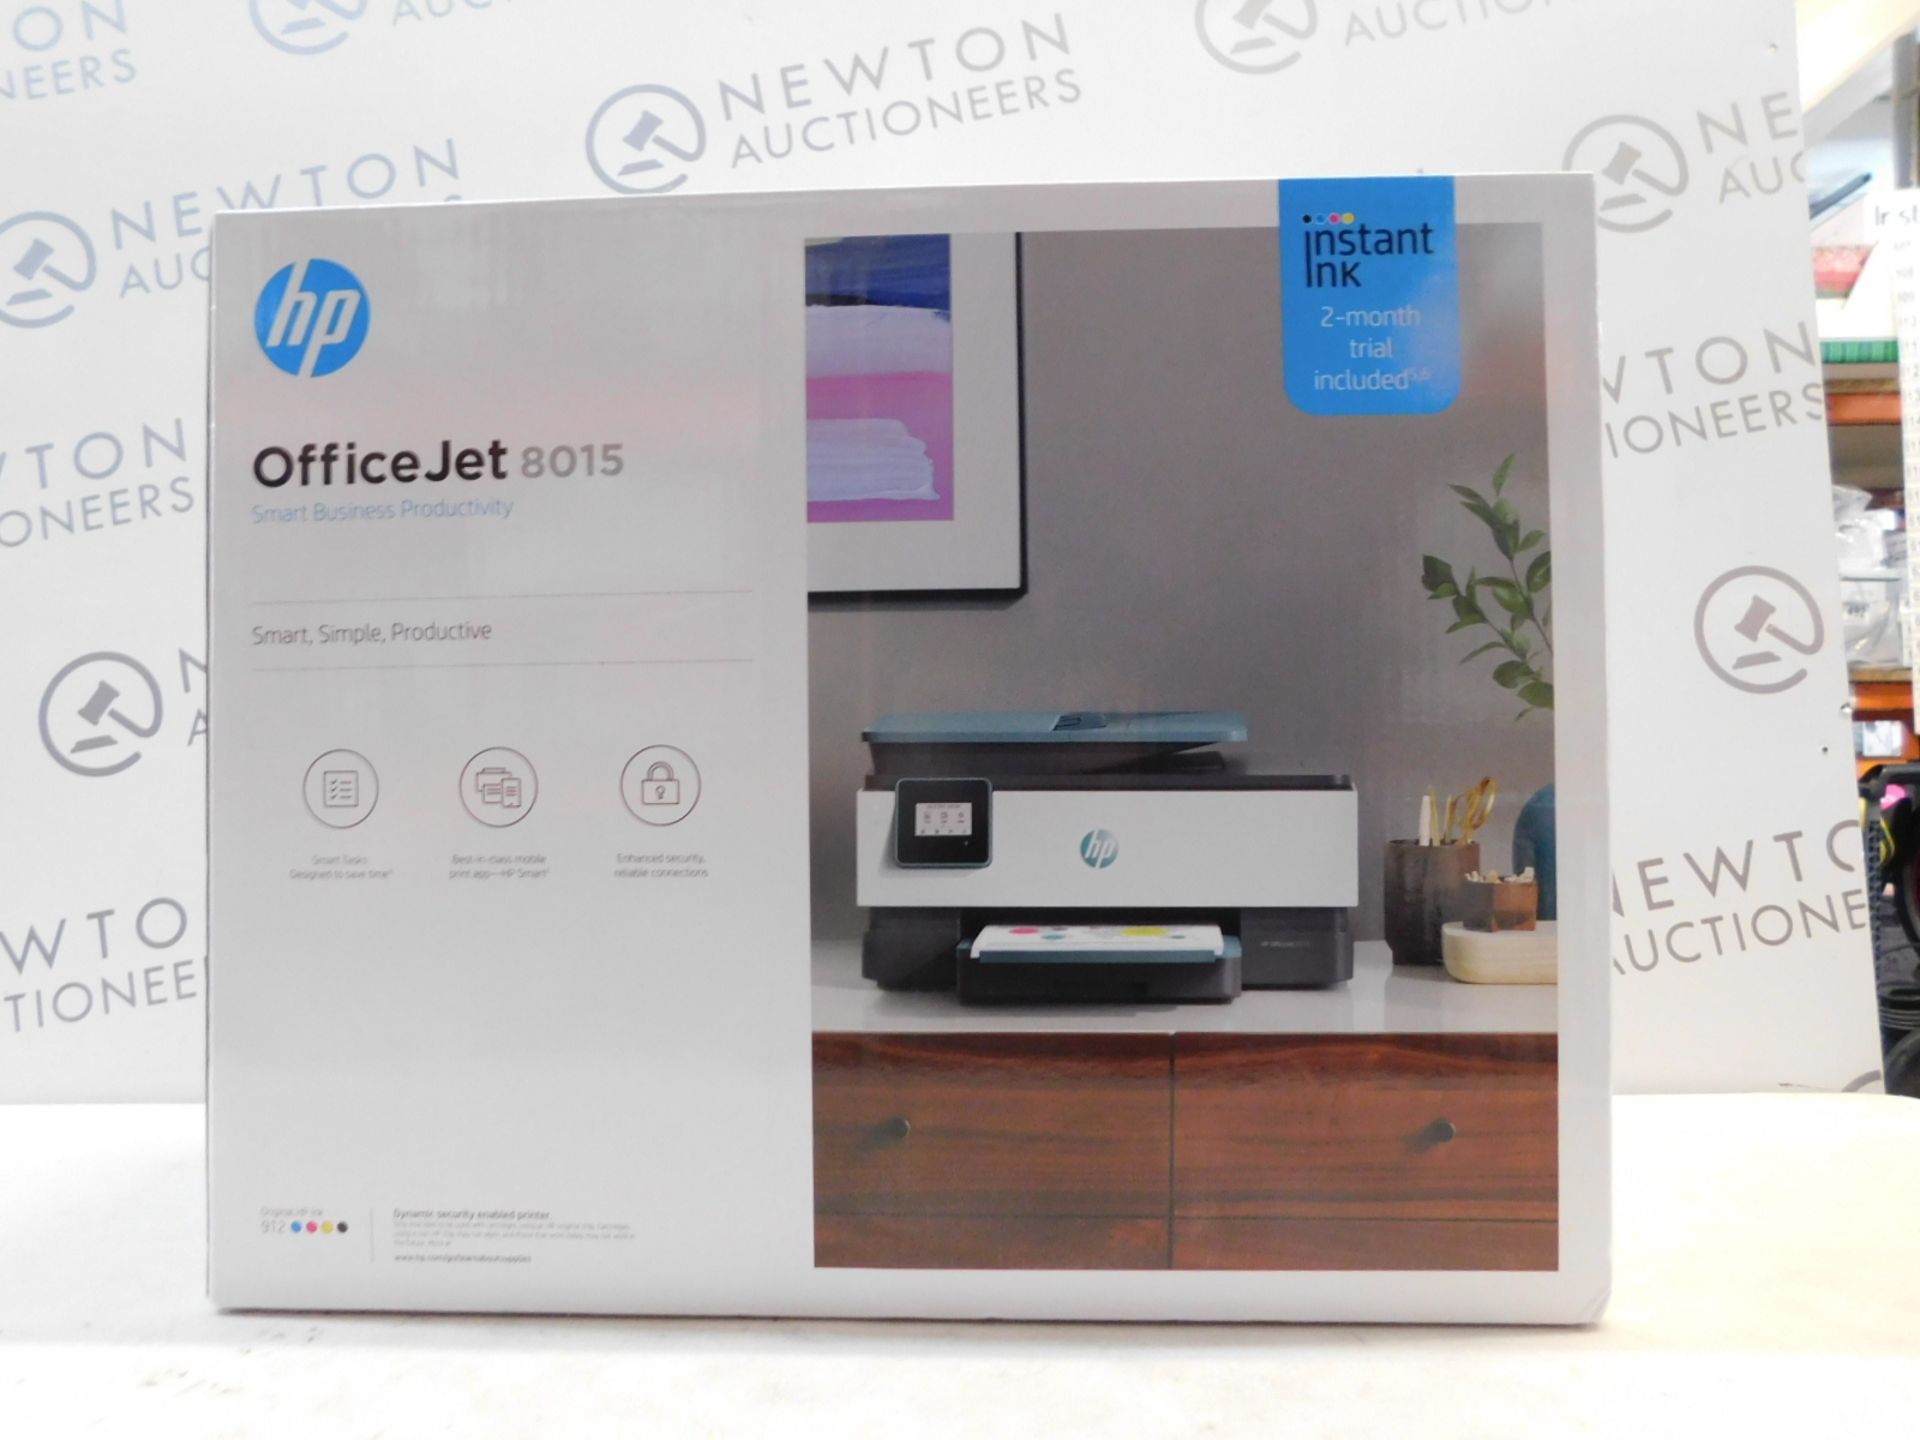 1 BOXED HP OFFICEJET 8015 ALL-IN-ONE WIRELESS PRINTER RRP Â£114.99